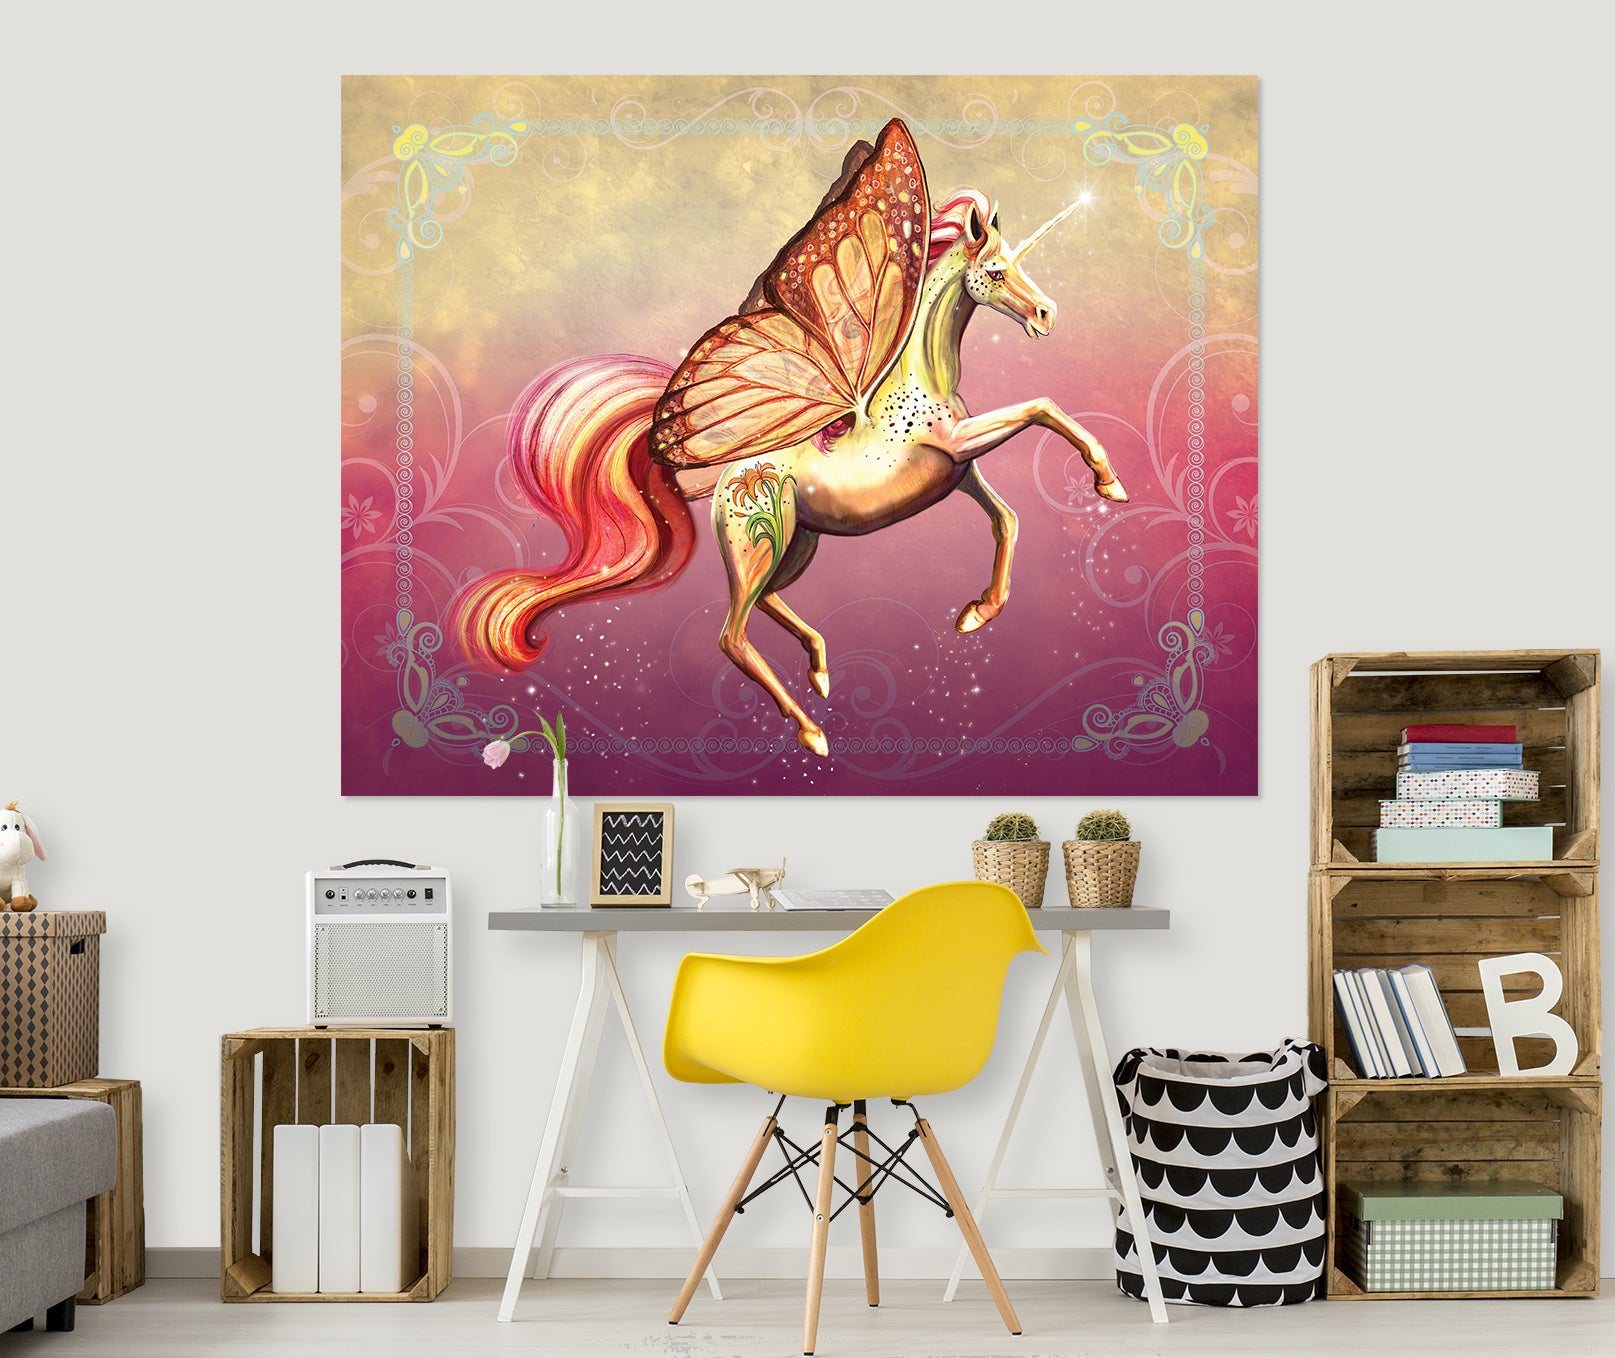 3D Wing Horse 104 Rose Catherine Khan Wall Sticker